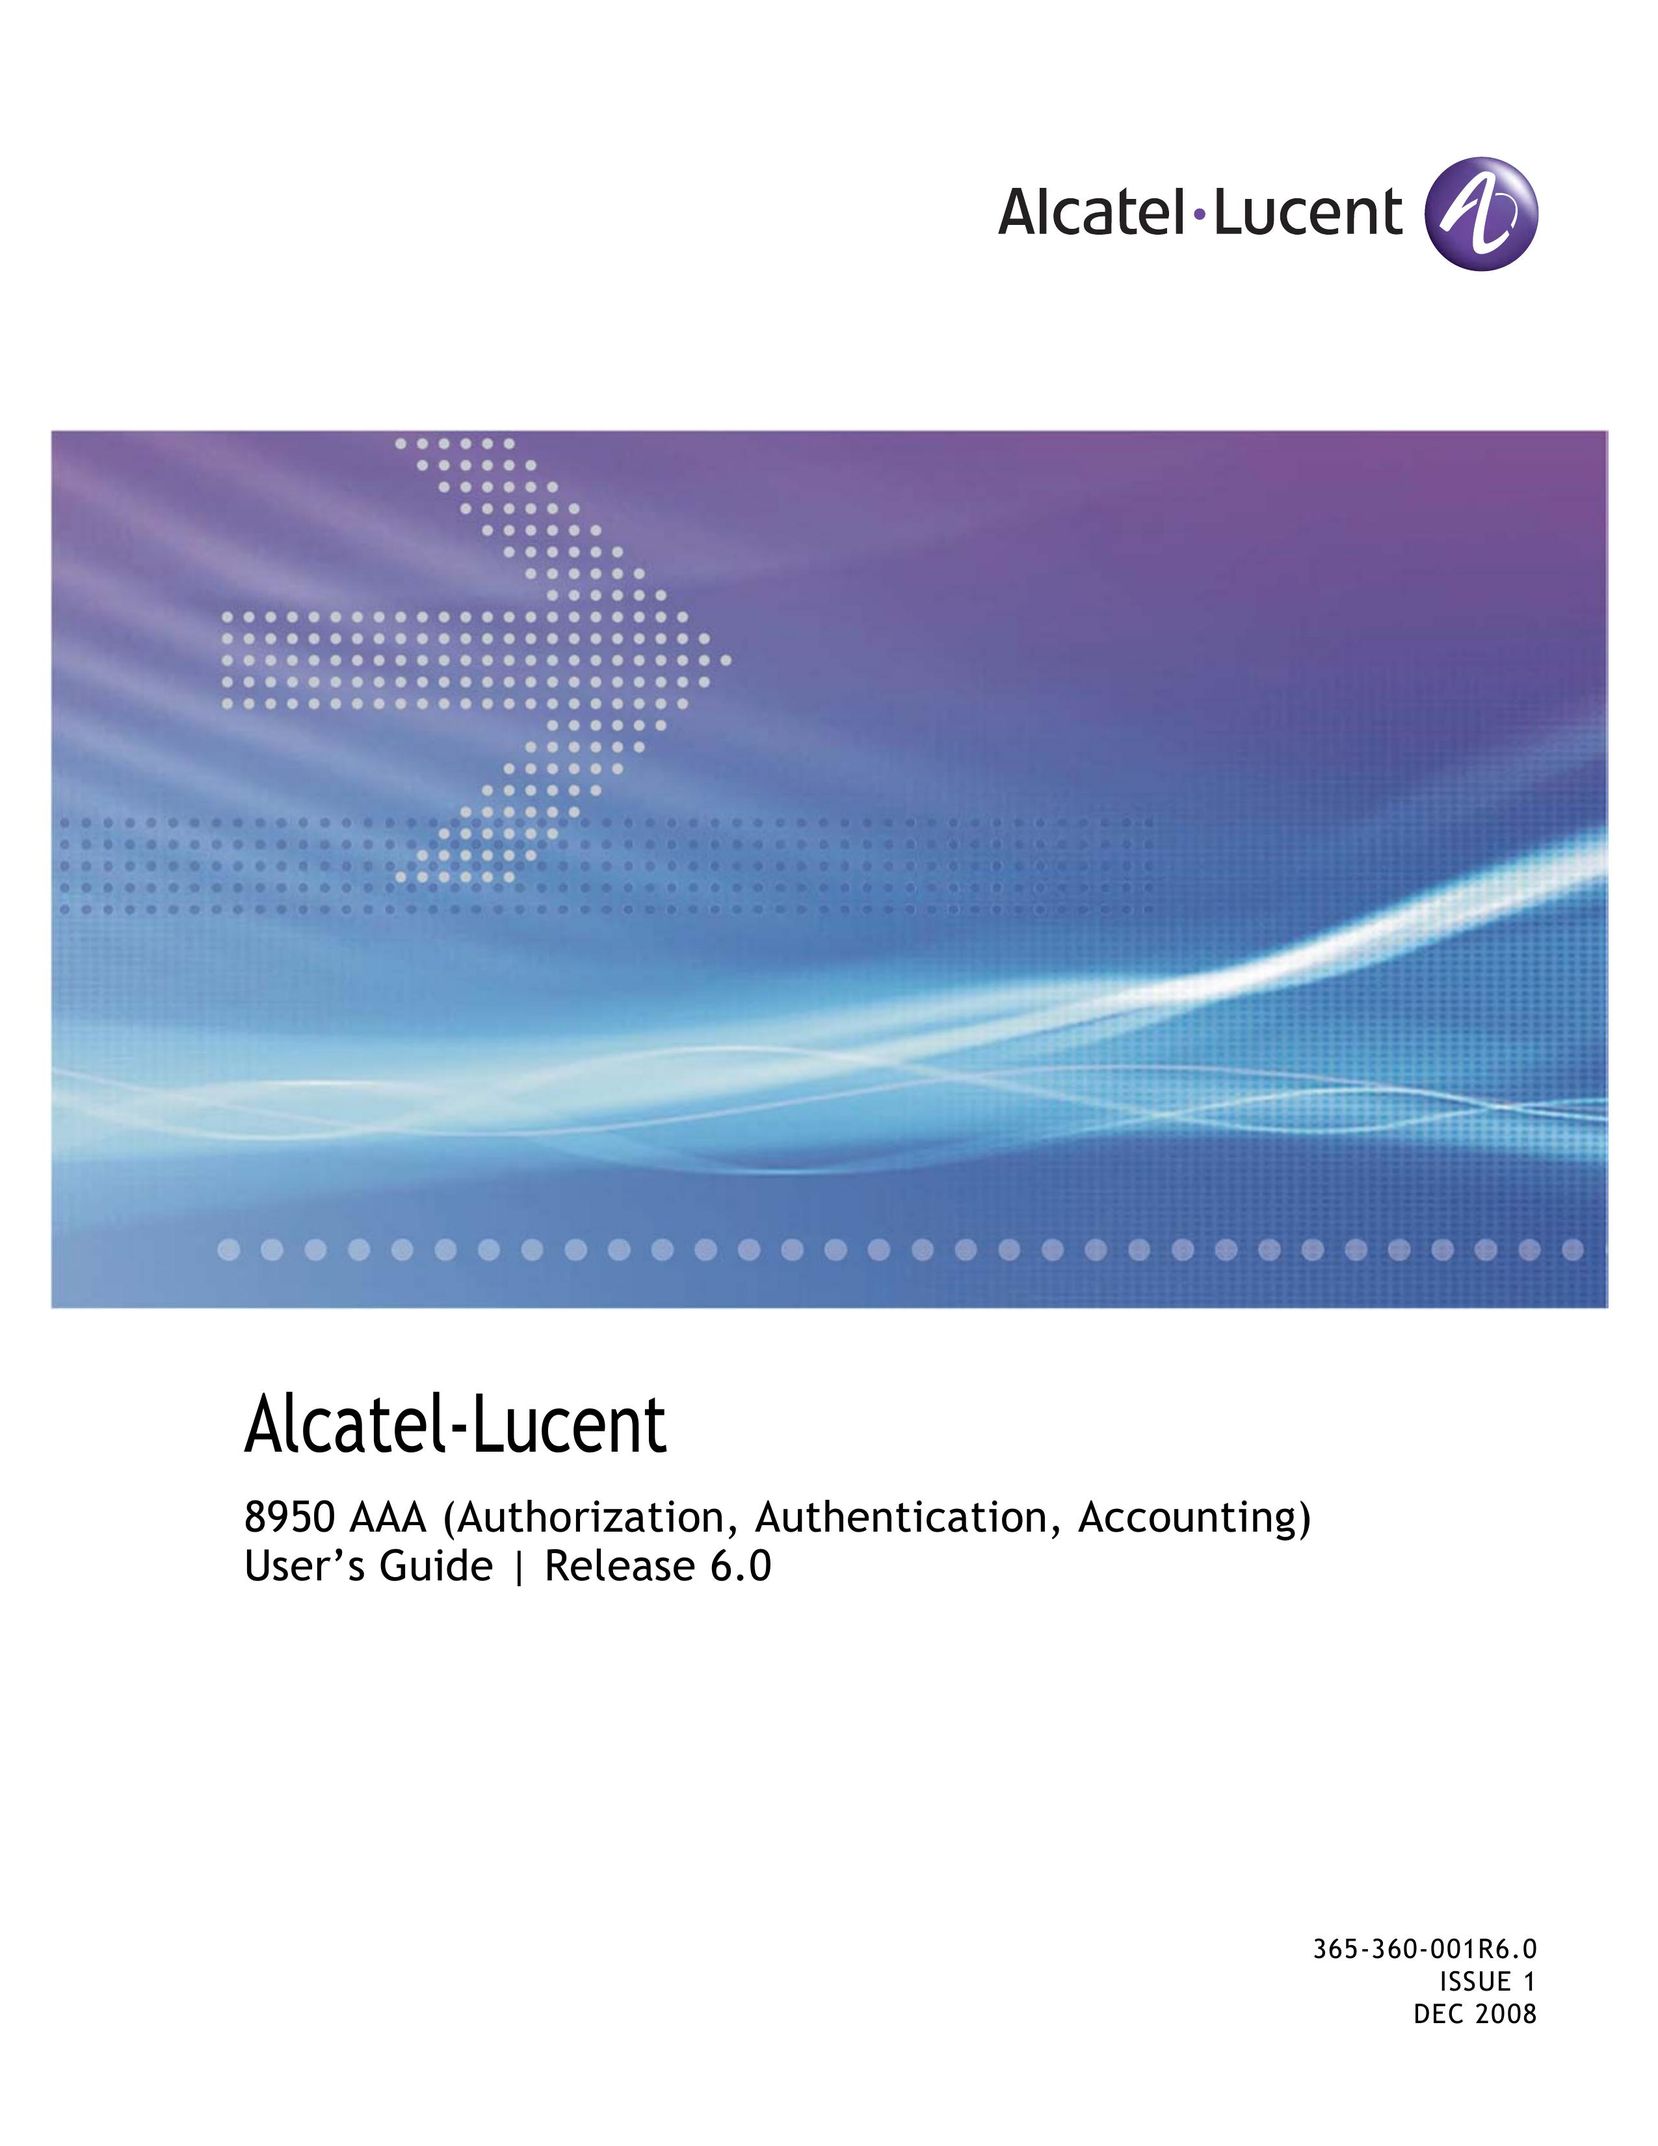 Alcatel-Lucent 8950 AAA Computer Accessories User Manual